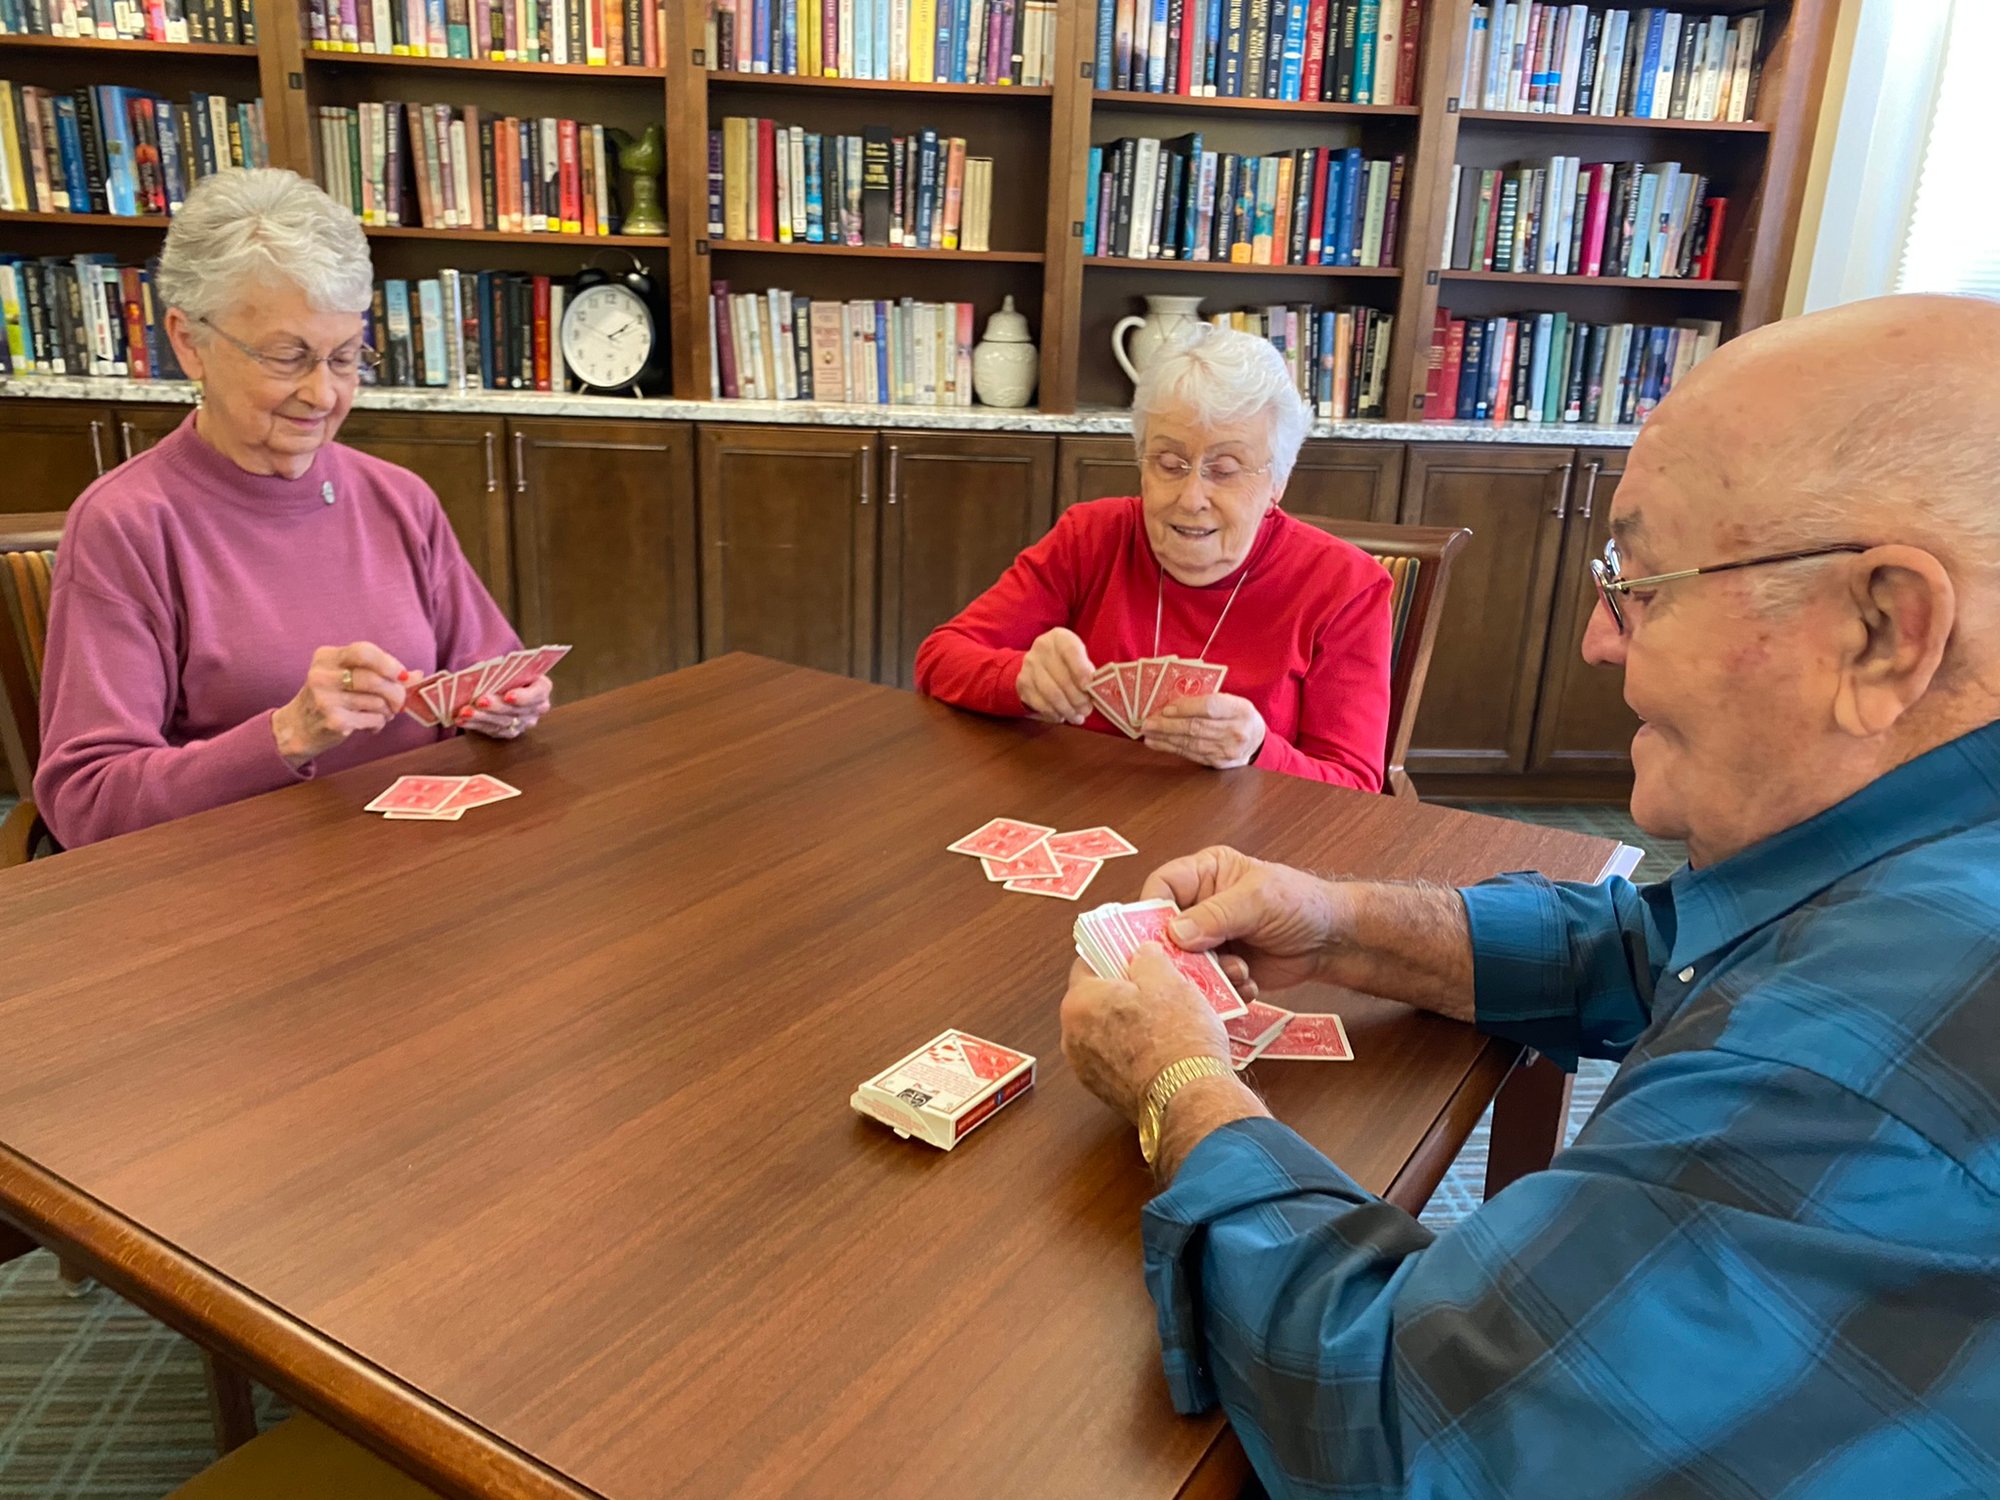 Friends playing cards at a table in the library 